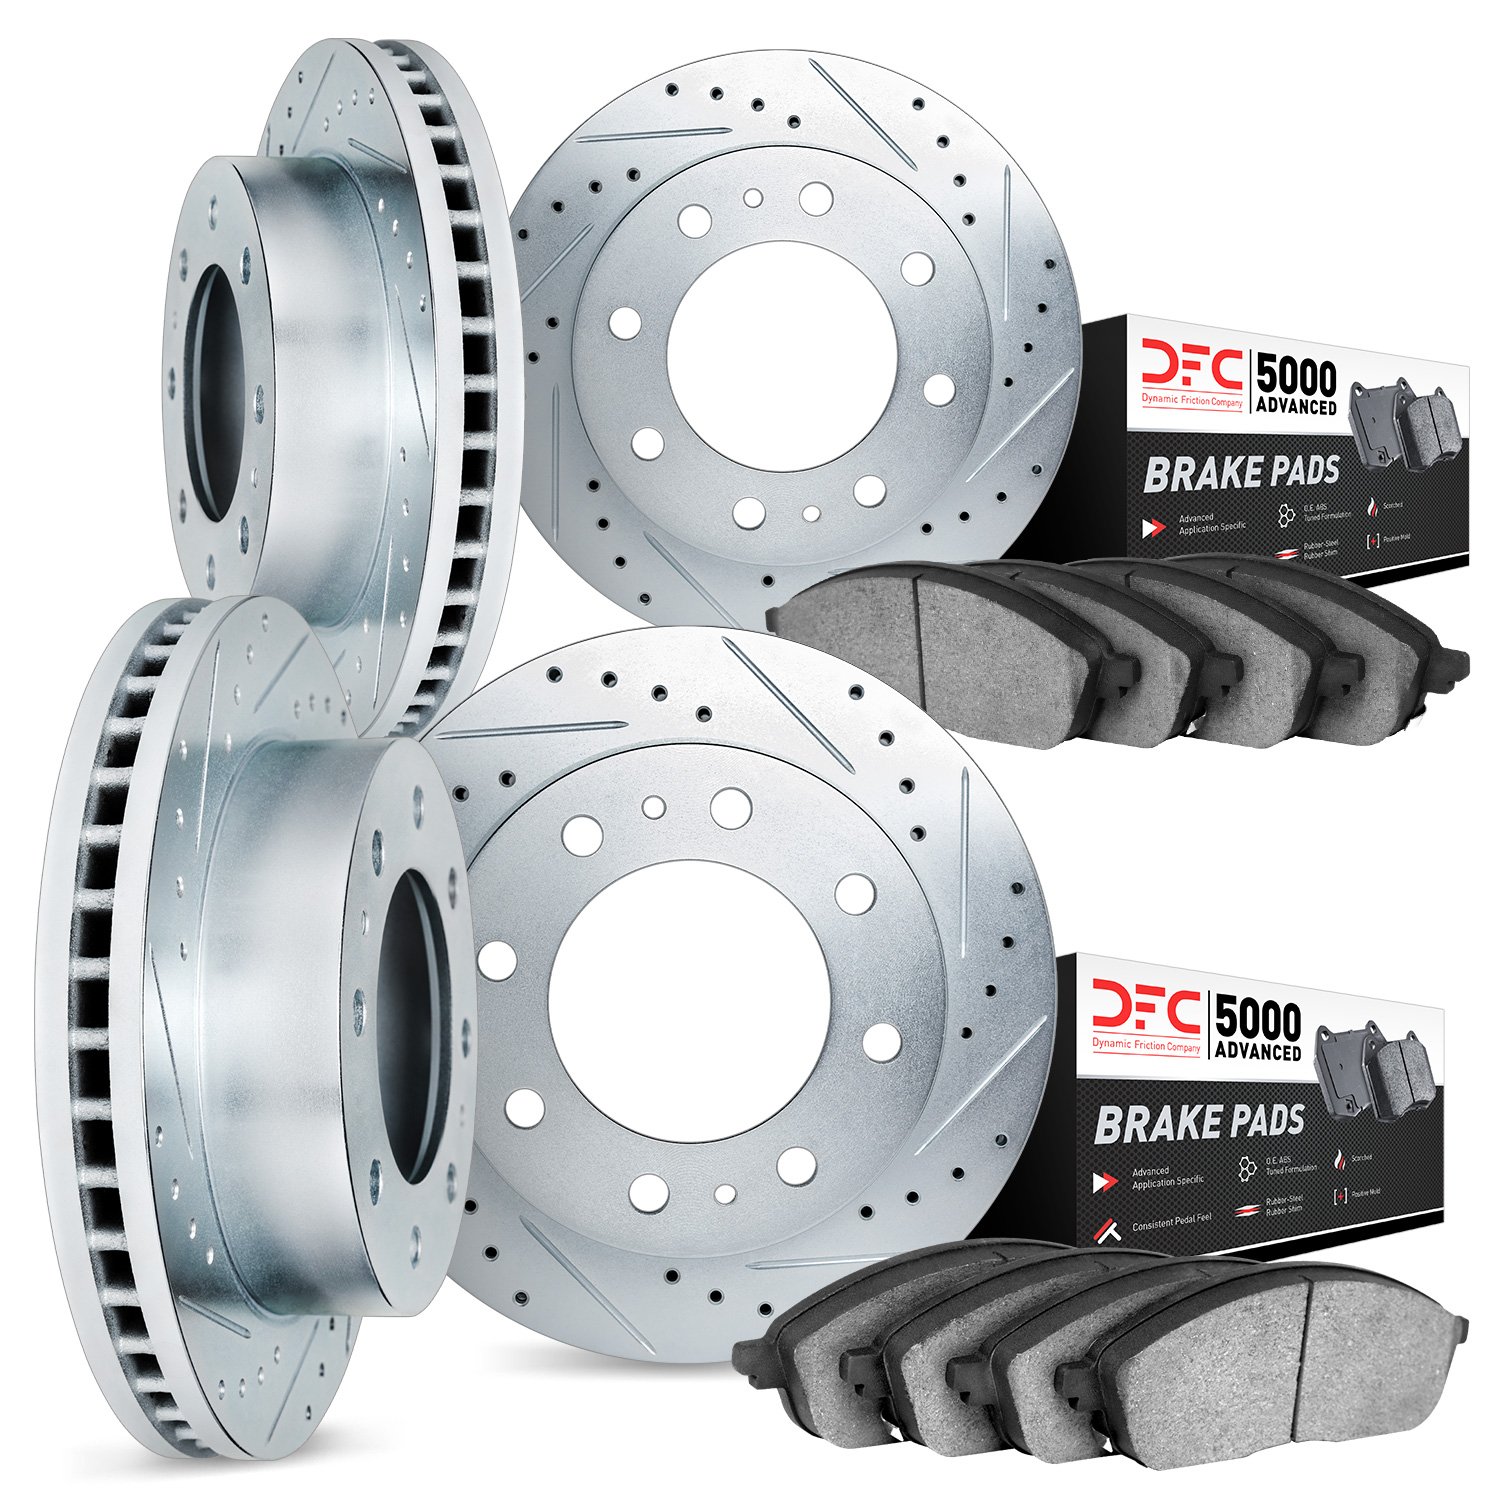 7504-54308 Drilled/Slotted Brake Rotors w/5000 Advanced Brake Pads Kit [Silver], 1999-2007 Ford/Lincoln/Mercury/Mazda, Position: